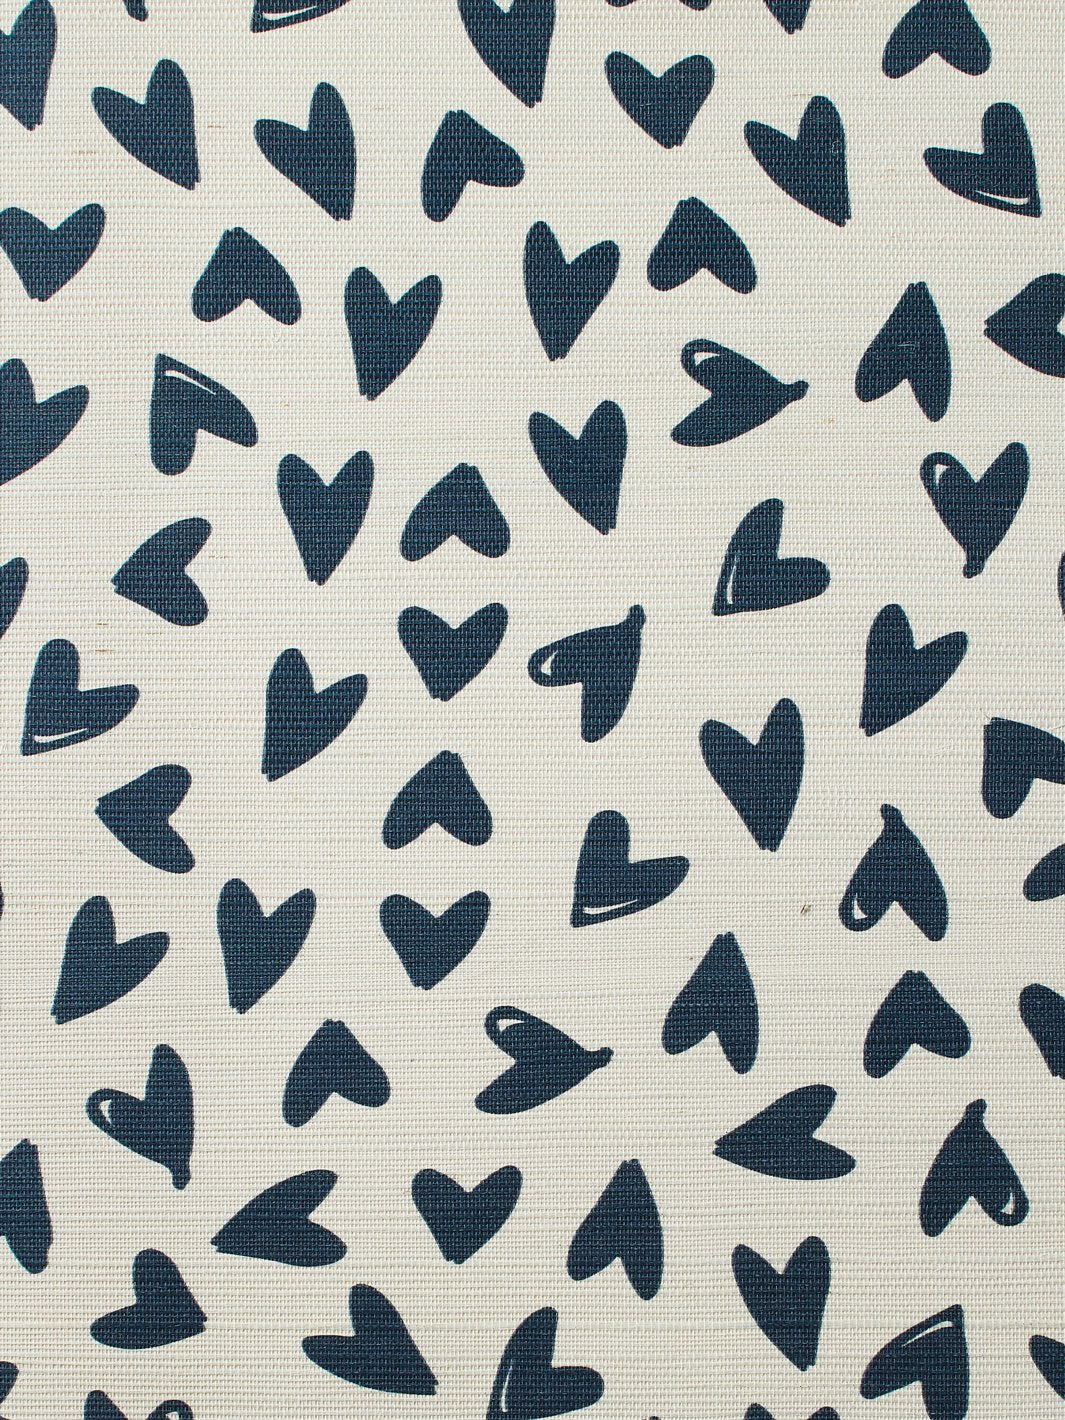 'Scattered Hearts' Grasscloth' Wallpaper by Sugar Paper - Navy